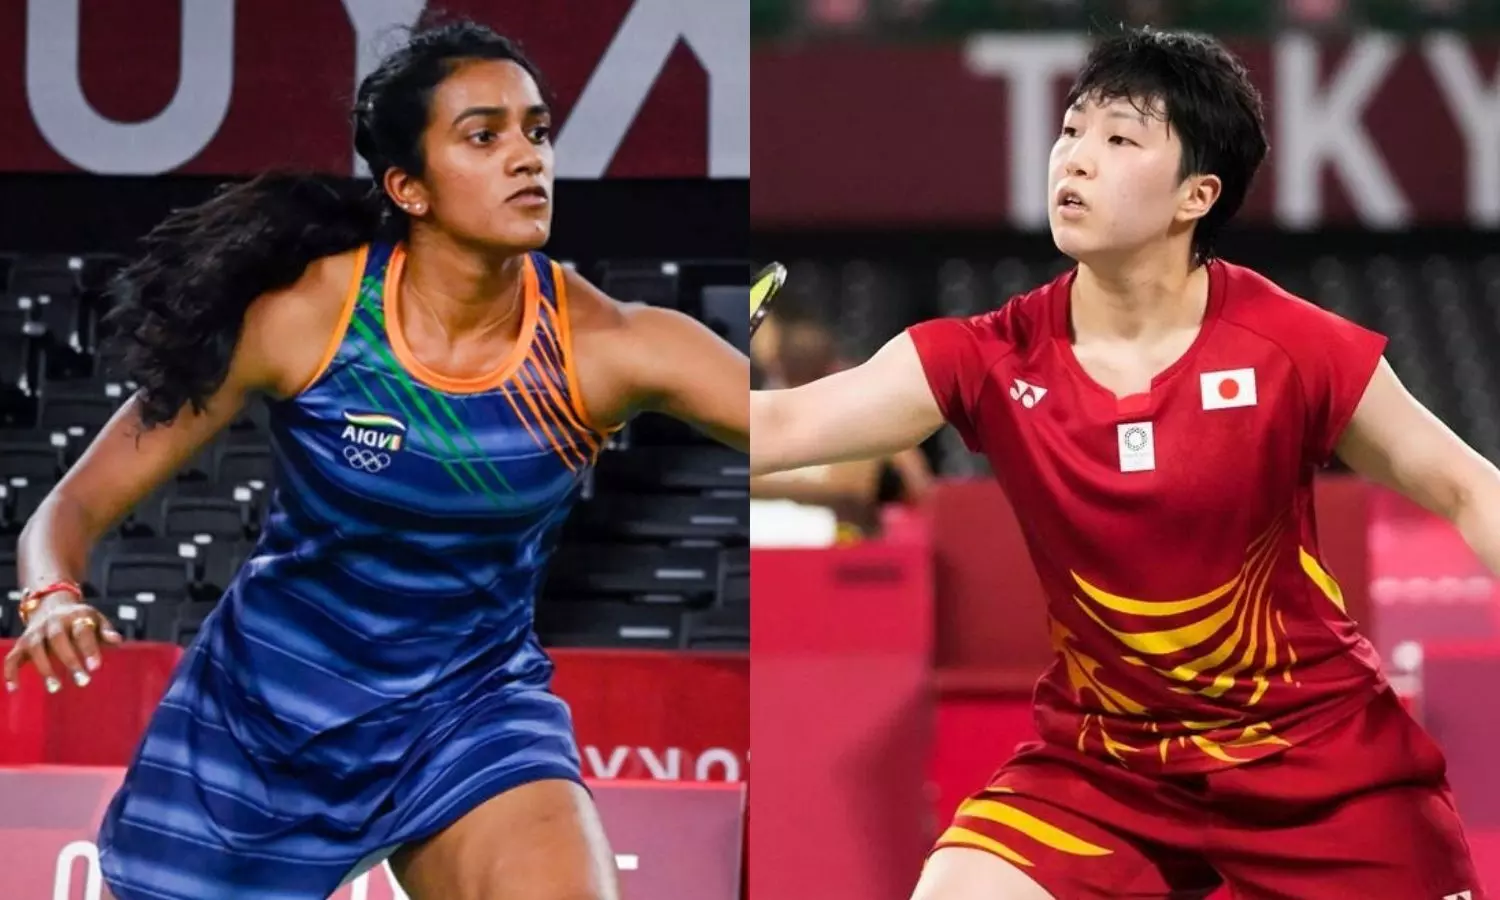 Tokyo Olympics Badminton LIVE Day 7 — PV Sindhu wins quarter final against Akane Yamaguchi, moves into semi finals